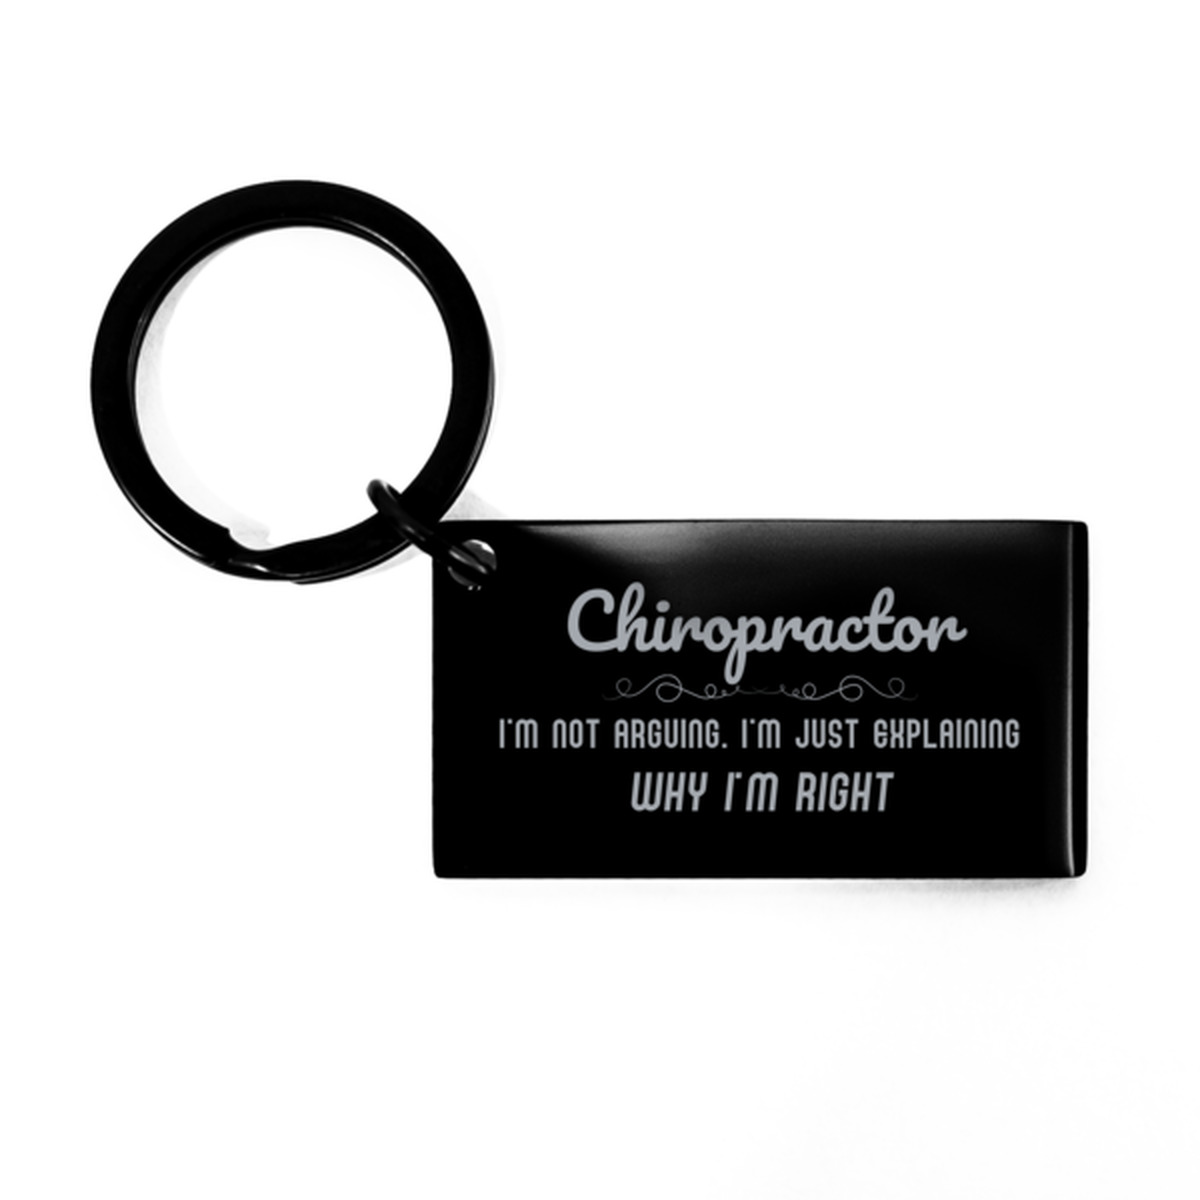 Chiropractor I'm not Arguing. I'm Just Explaining Why I'm RIGHT Keychain, Funny Saying Quote Chiropractor Gifts For Chiropractor Graduation Birthday Christmas Gifts for Men Women Coworker